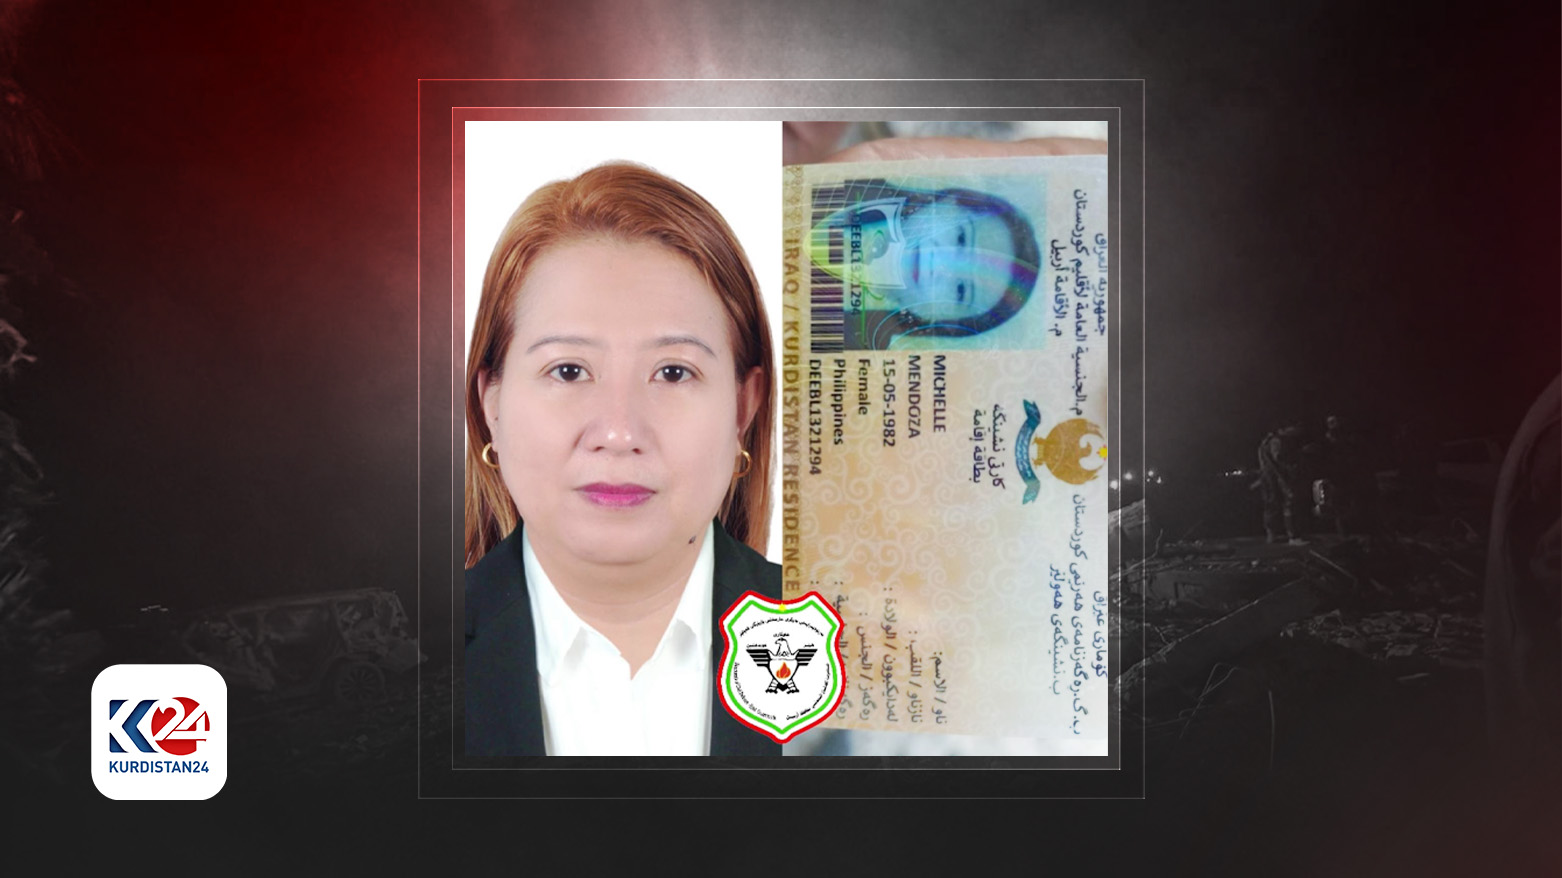 A photo of Michelle Mendoza and her KRG Residency Card. (Photo designed by Kurdistan 24)